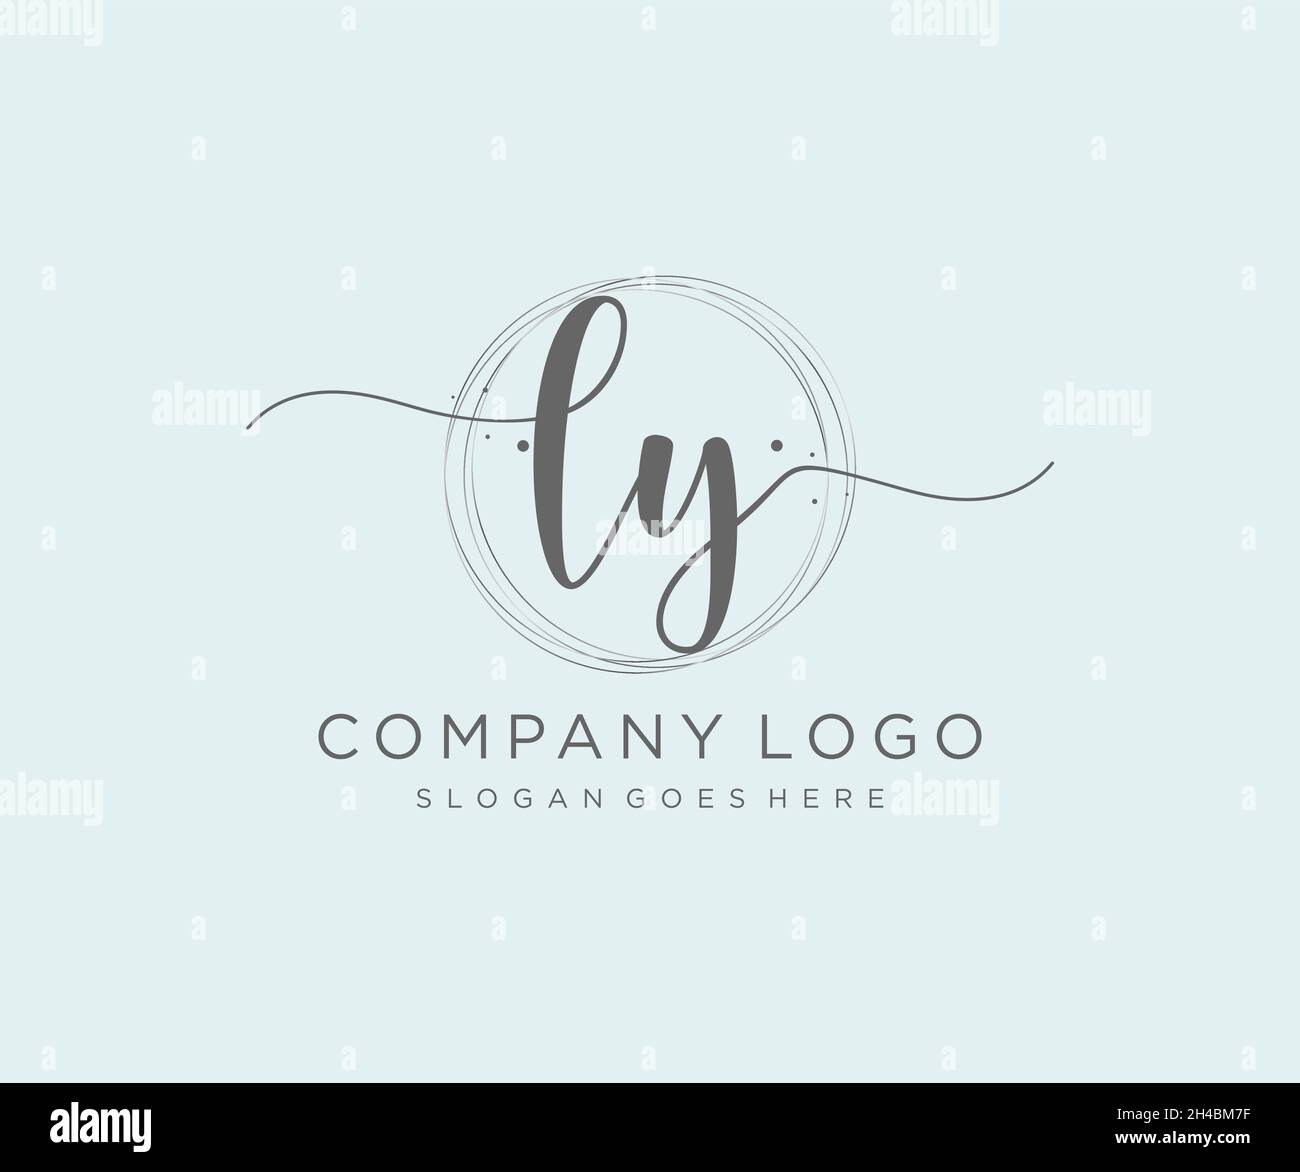 Premium Vector  Simple ly monogram logo suitable for any business